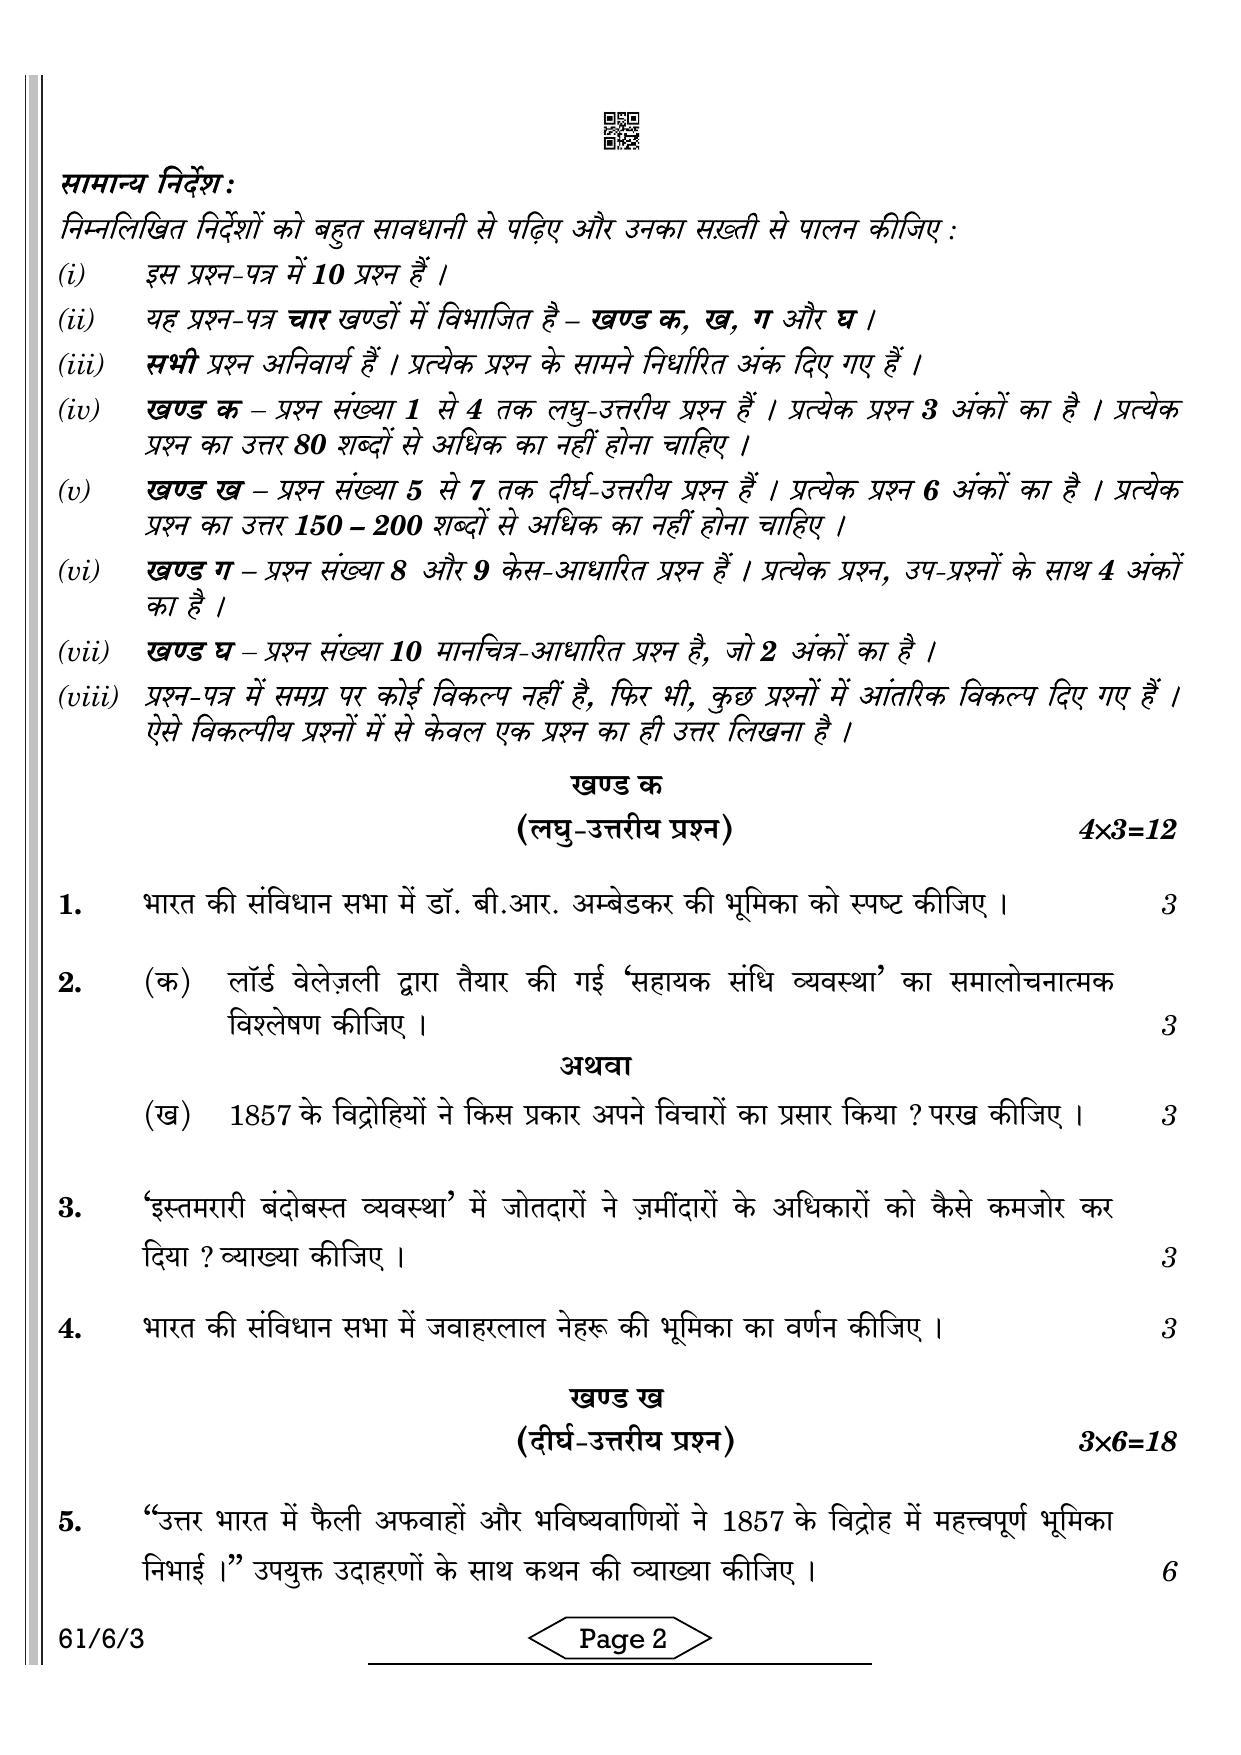 CBSE Class 12 61-6-3 HISTORY 2022 Compartment Question Paper - Page 2